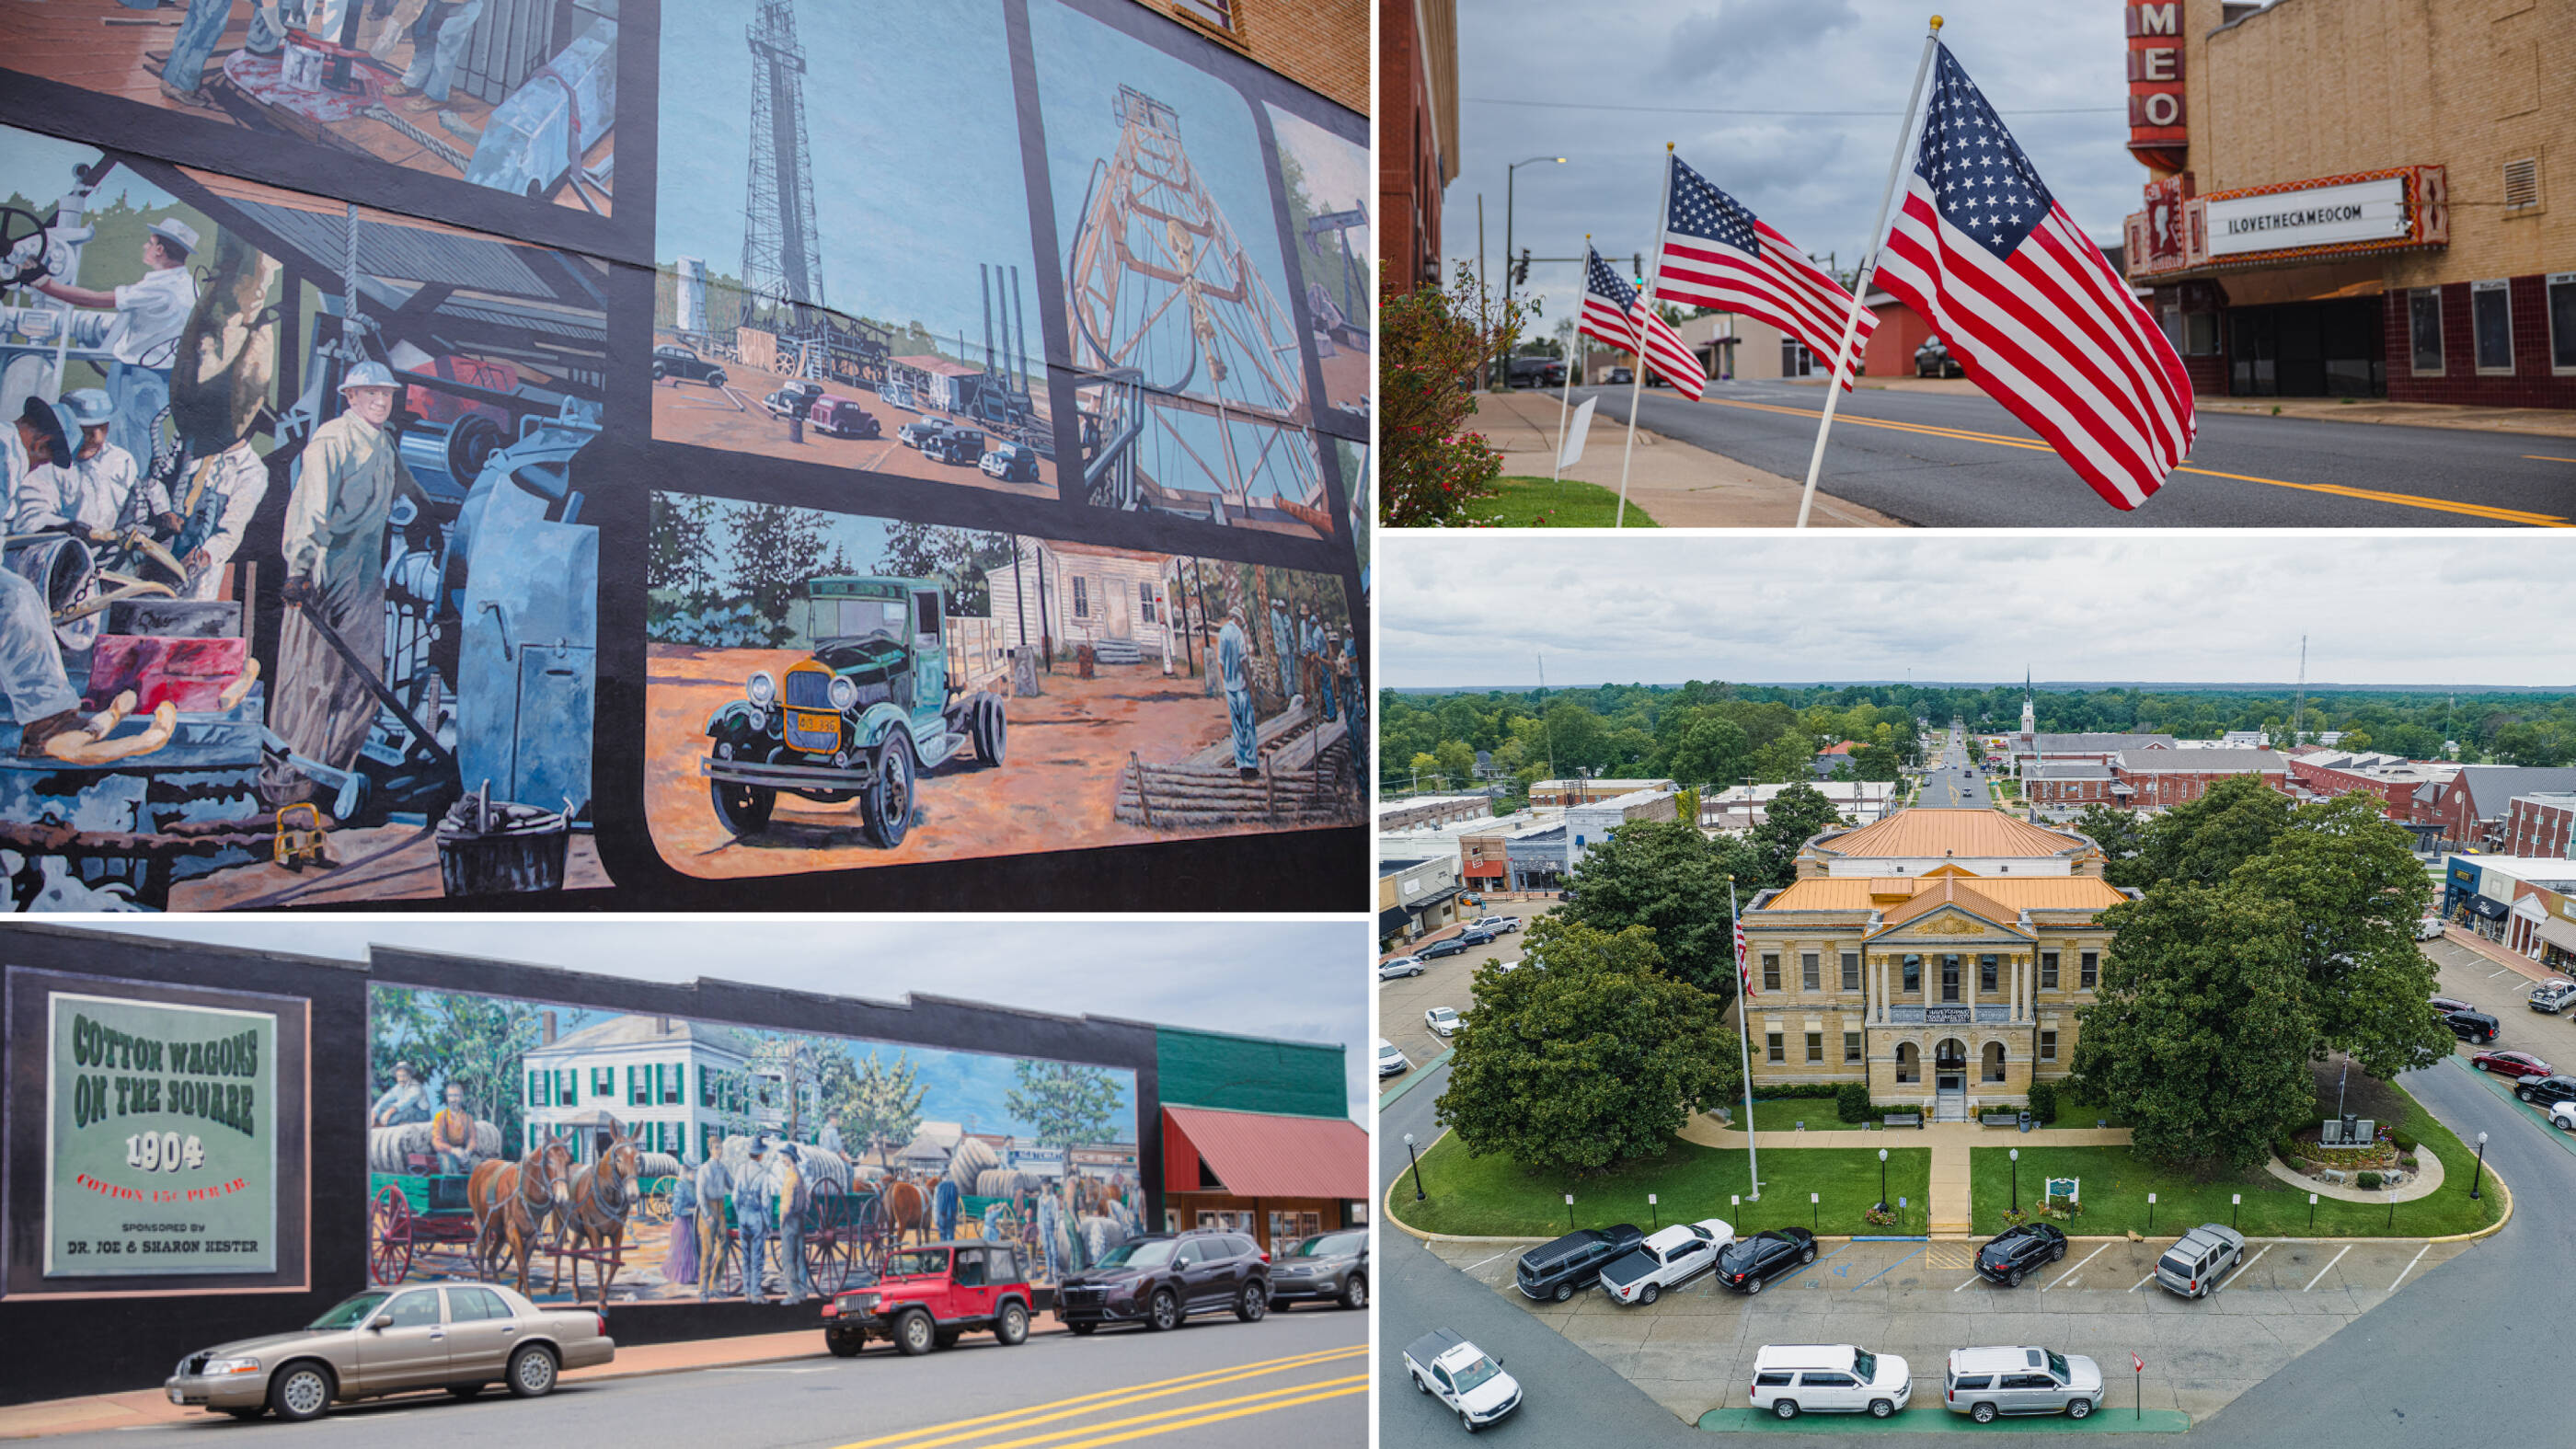 Collage showing downtown murals and American flags